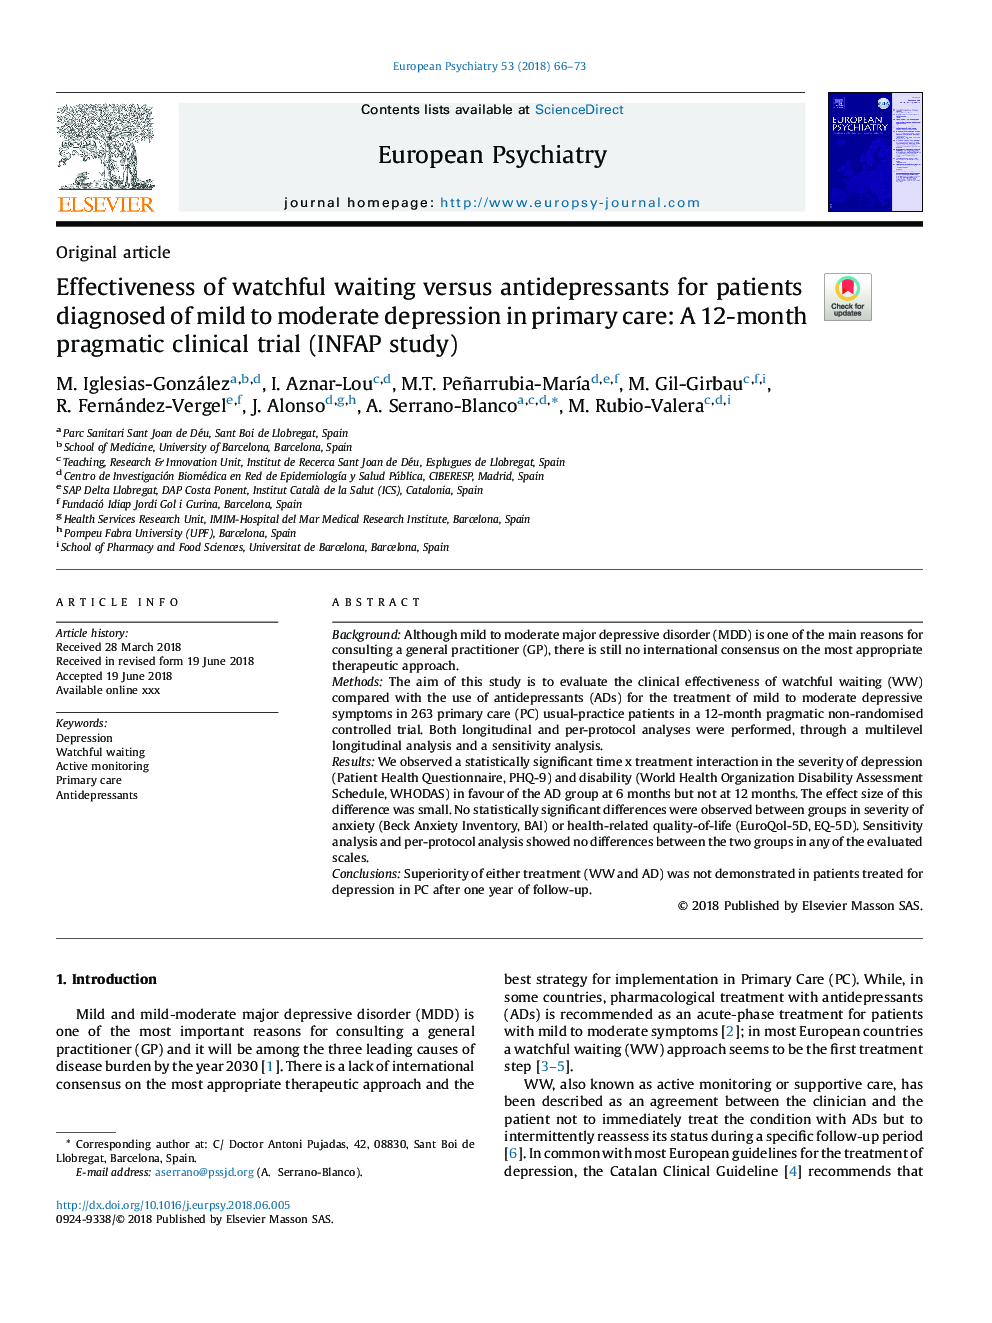 Effectiveness of watchful waiting versus antidepressants for patients diagnosed of mild to moderate depression in primary care: A 12-month pragmatic clinical trial (INFAP study)